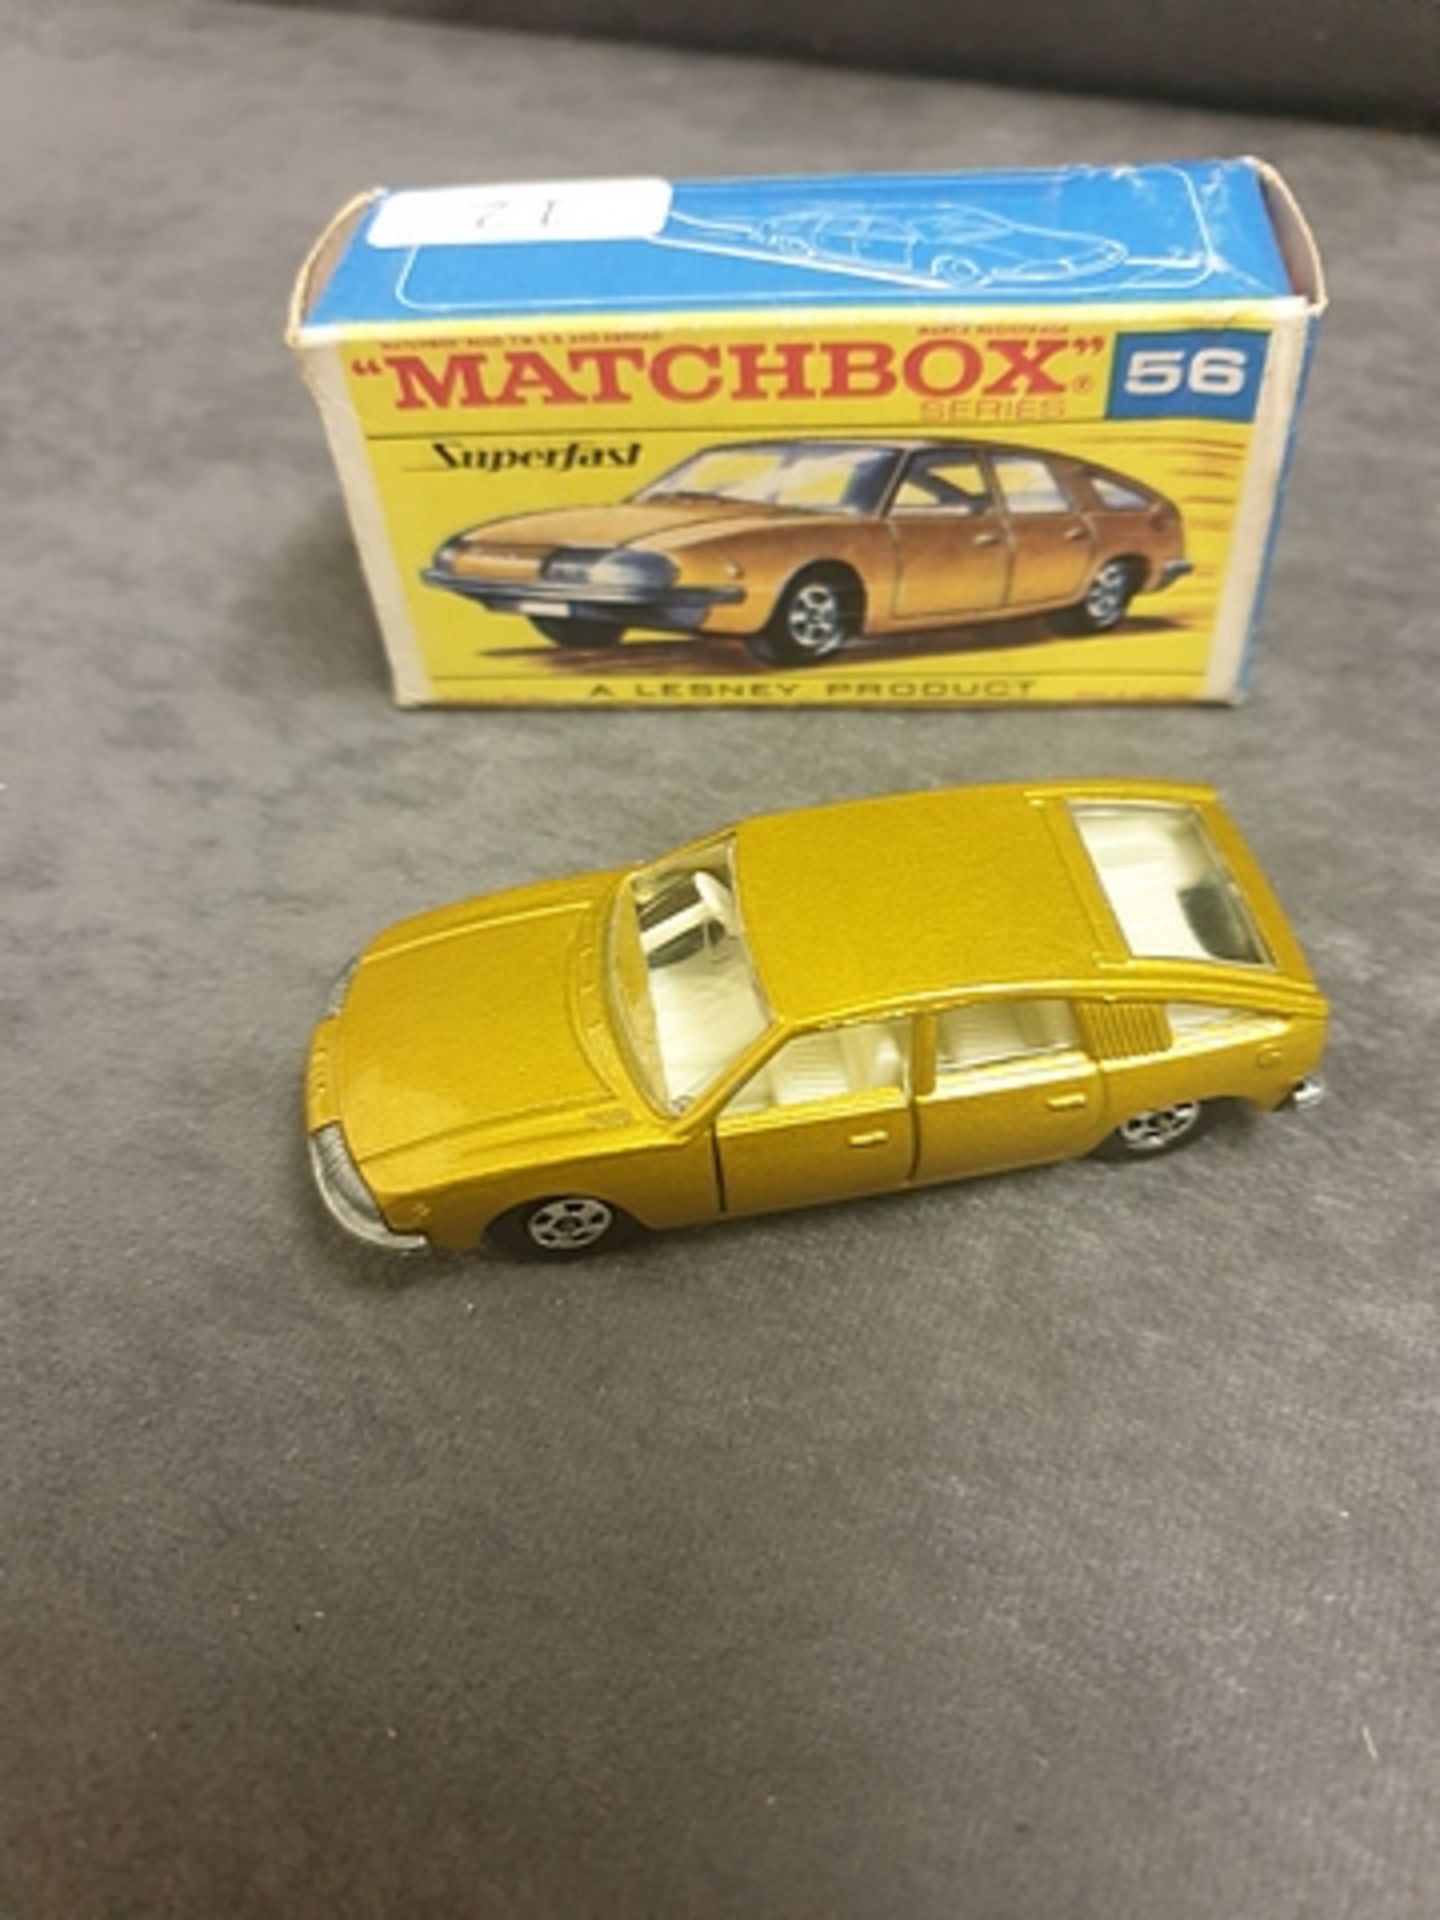 3x Matchbox Superfast Diecast Cars #56 2x Gold In Boxes One With End Flap Missing 1x Orange In - Image 2 of 4